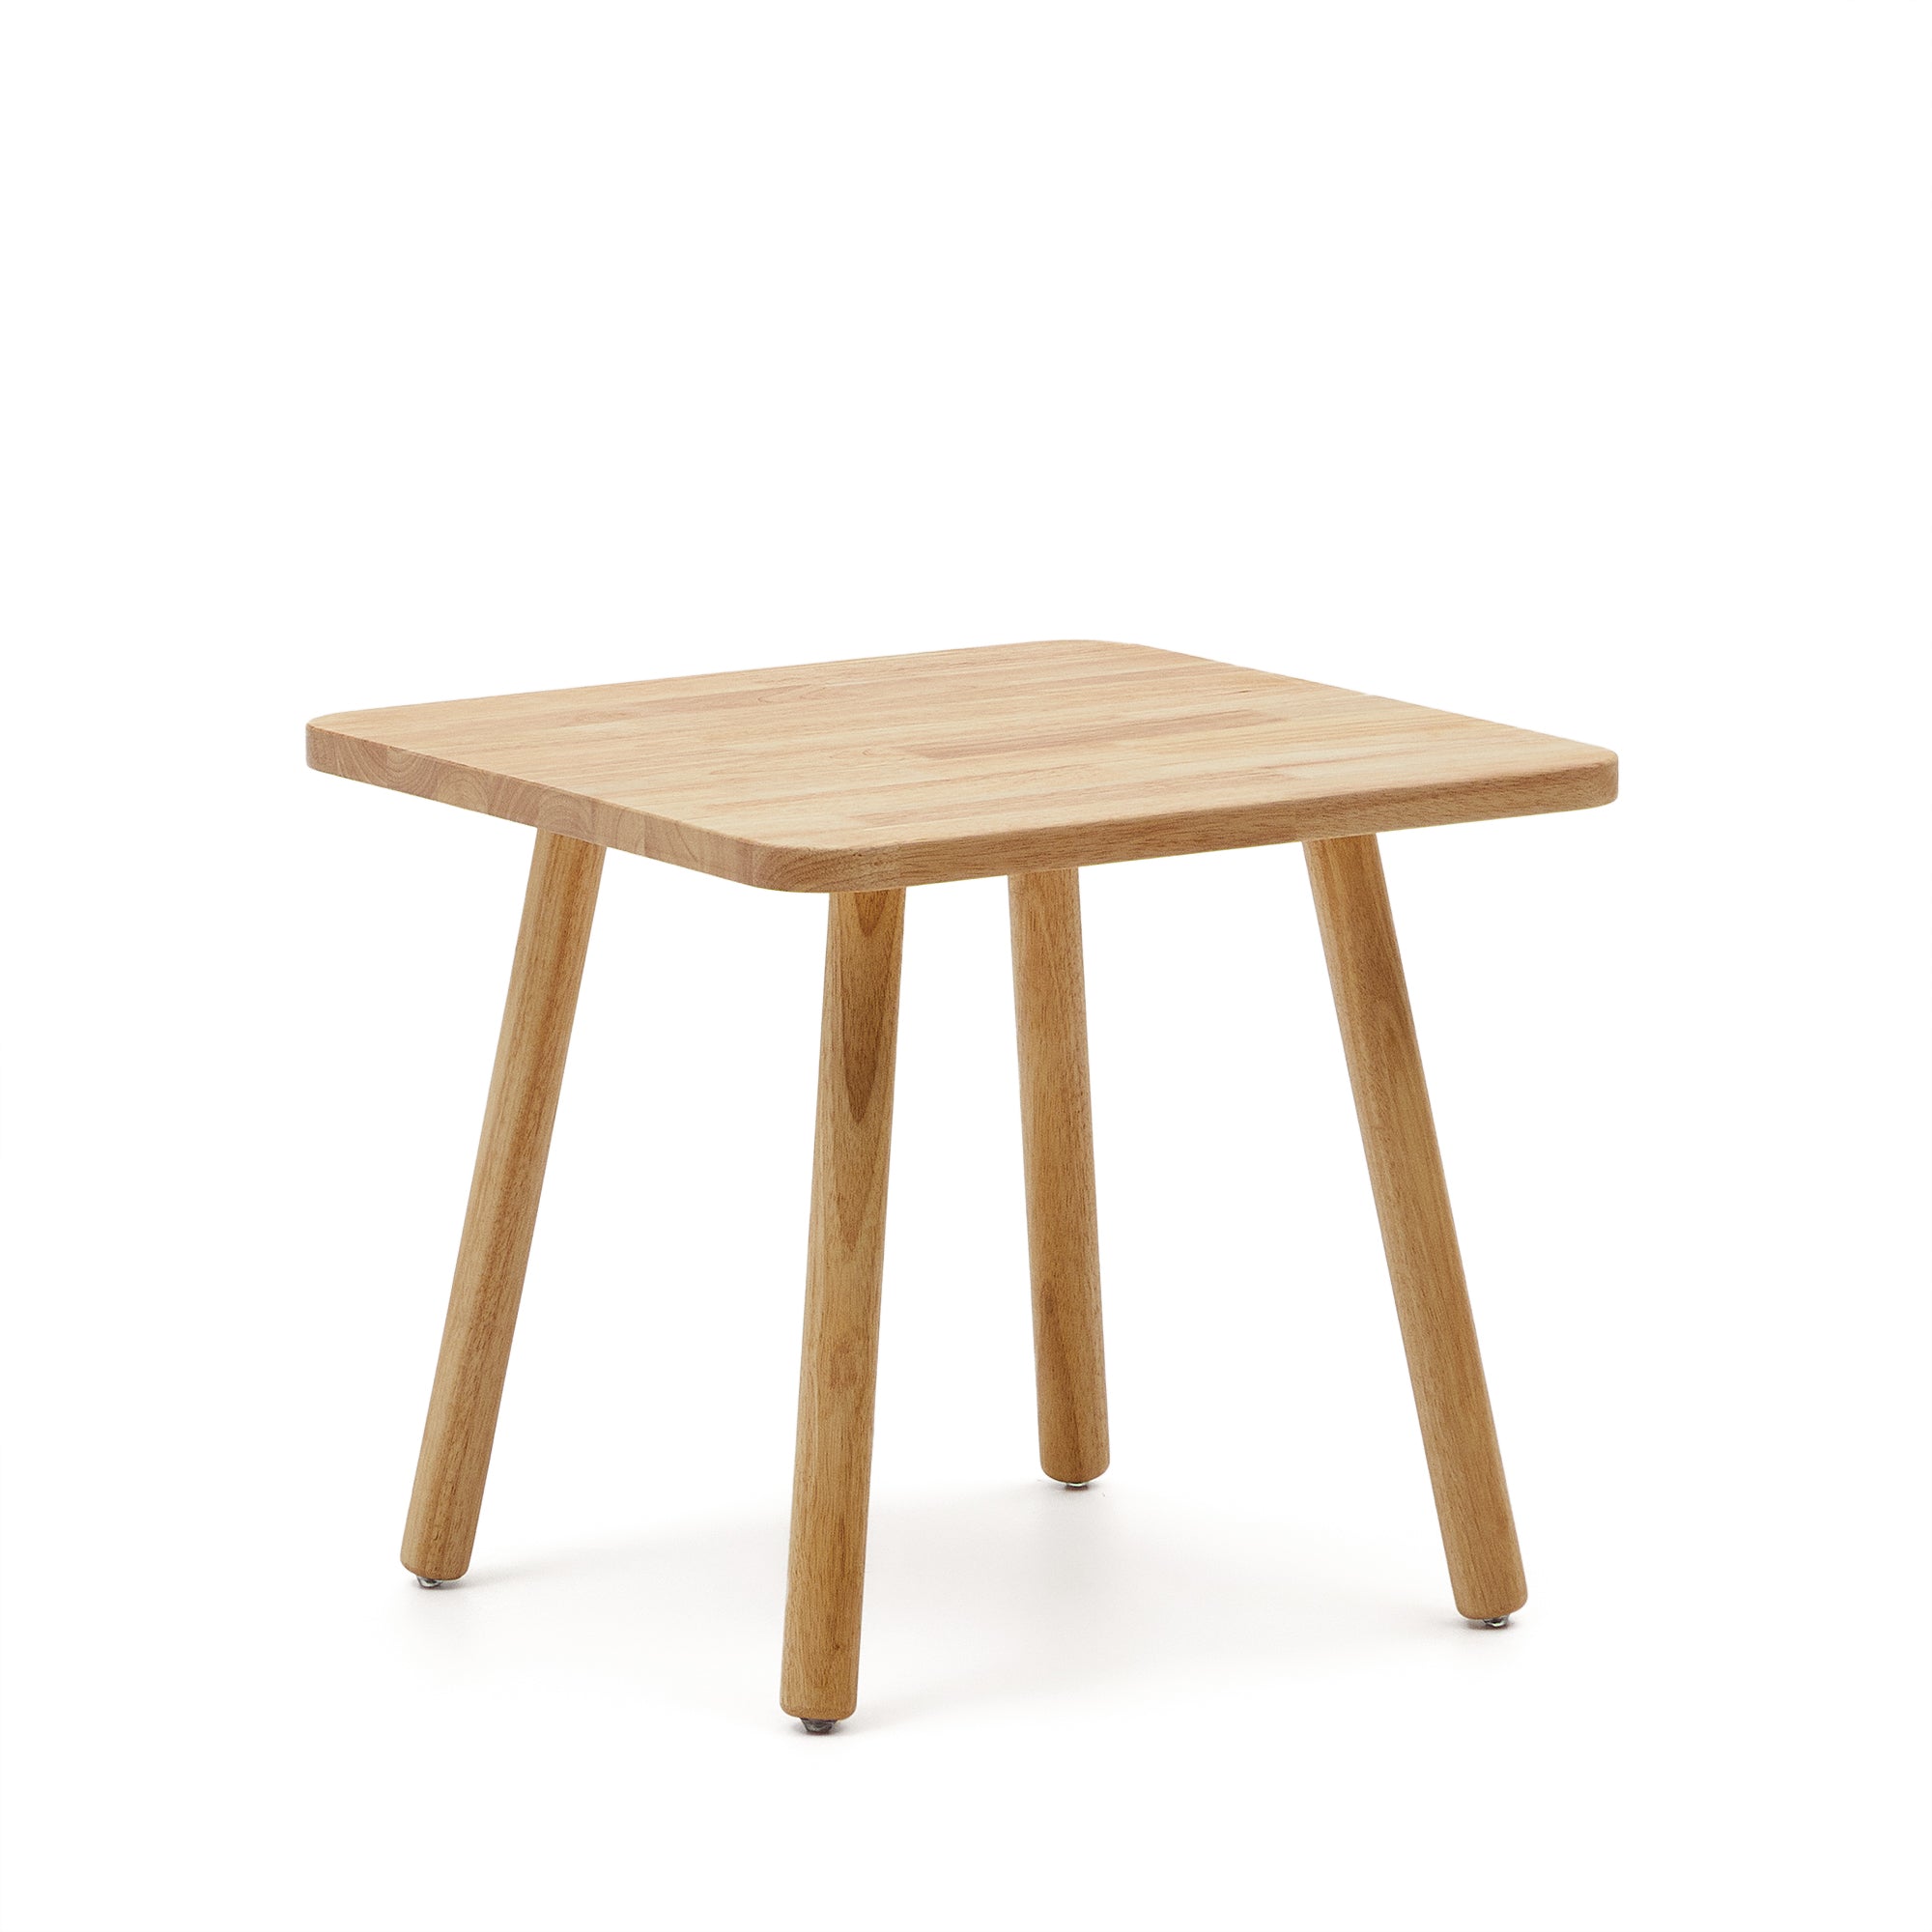 Square Dilcia kids table in solid rubber wood 55 x 55 cm